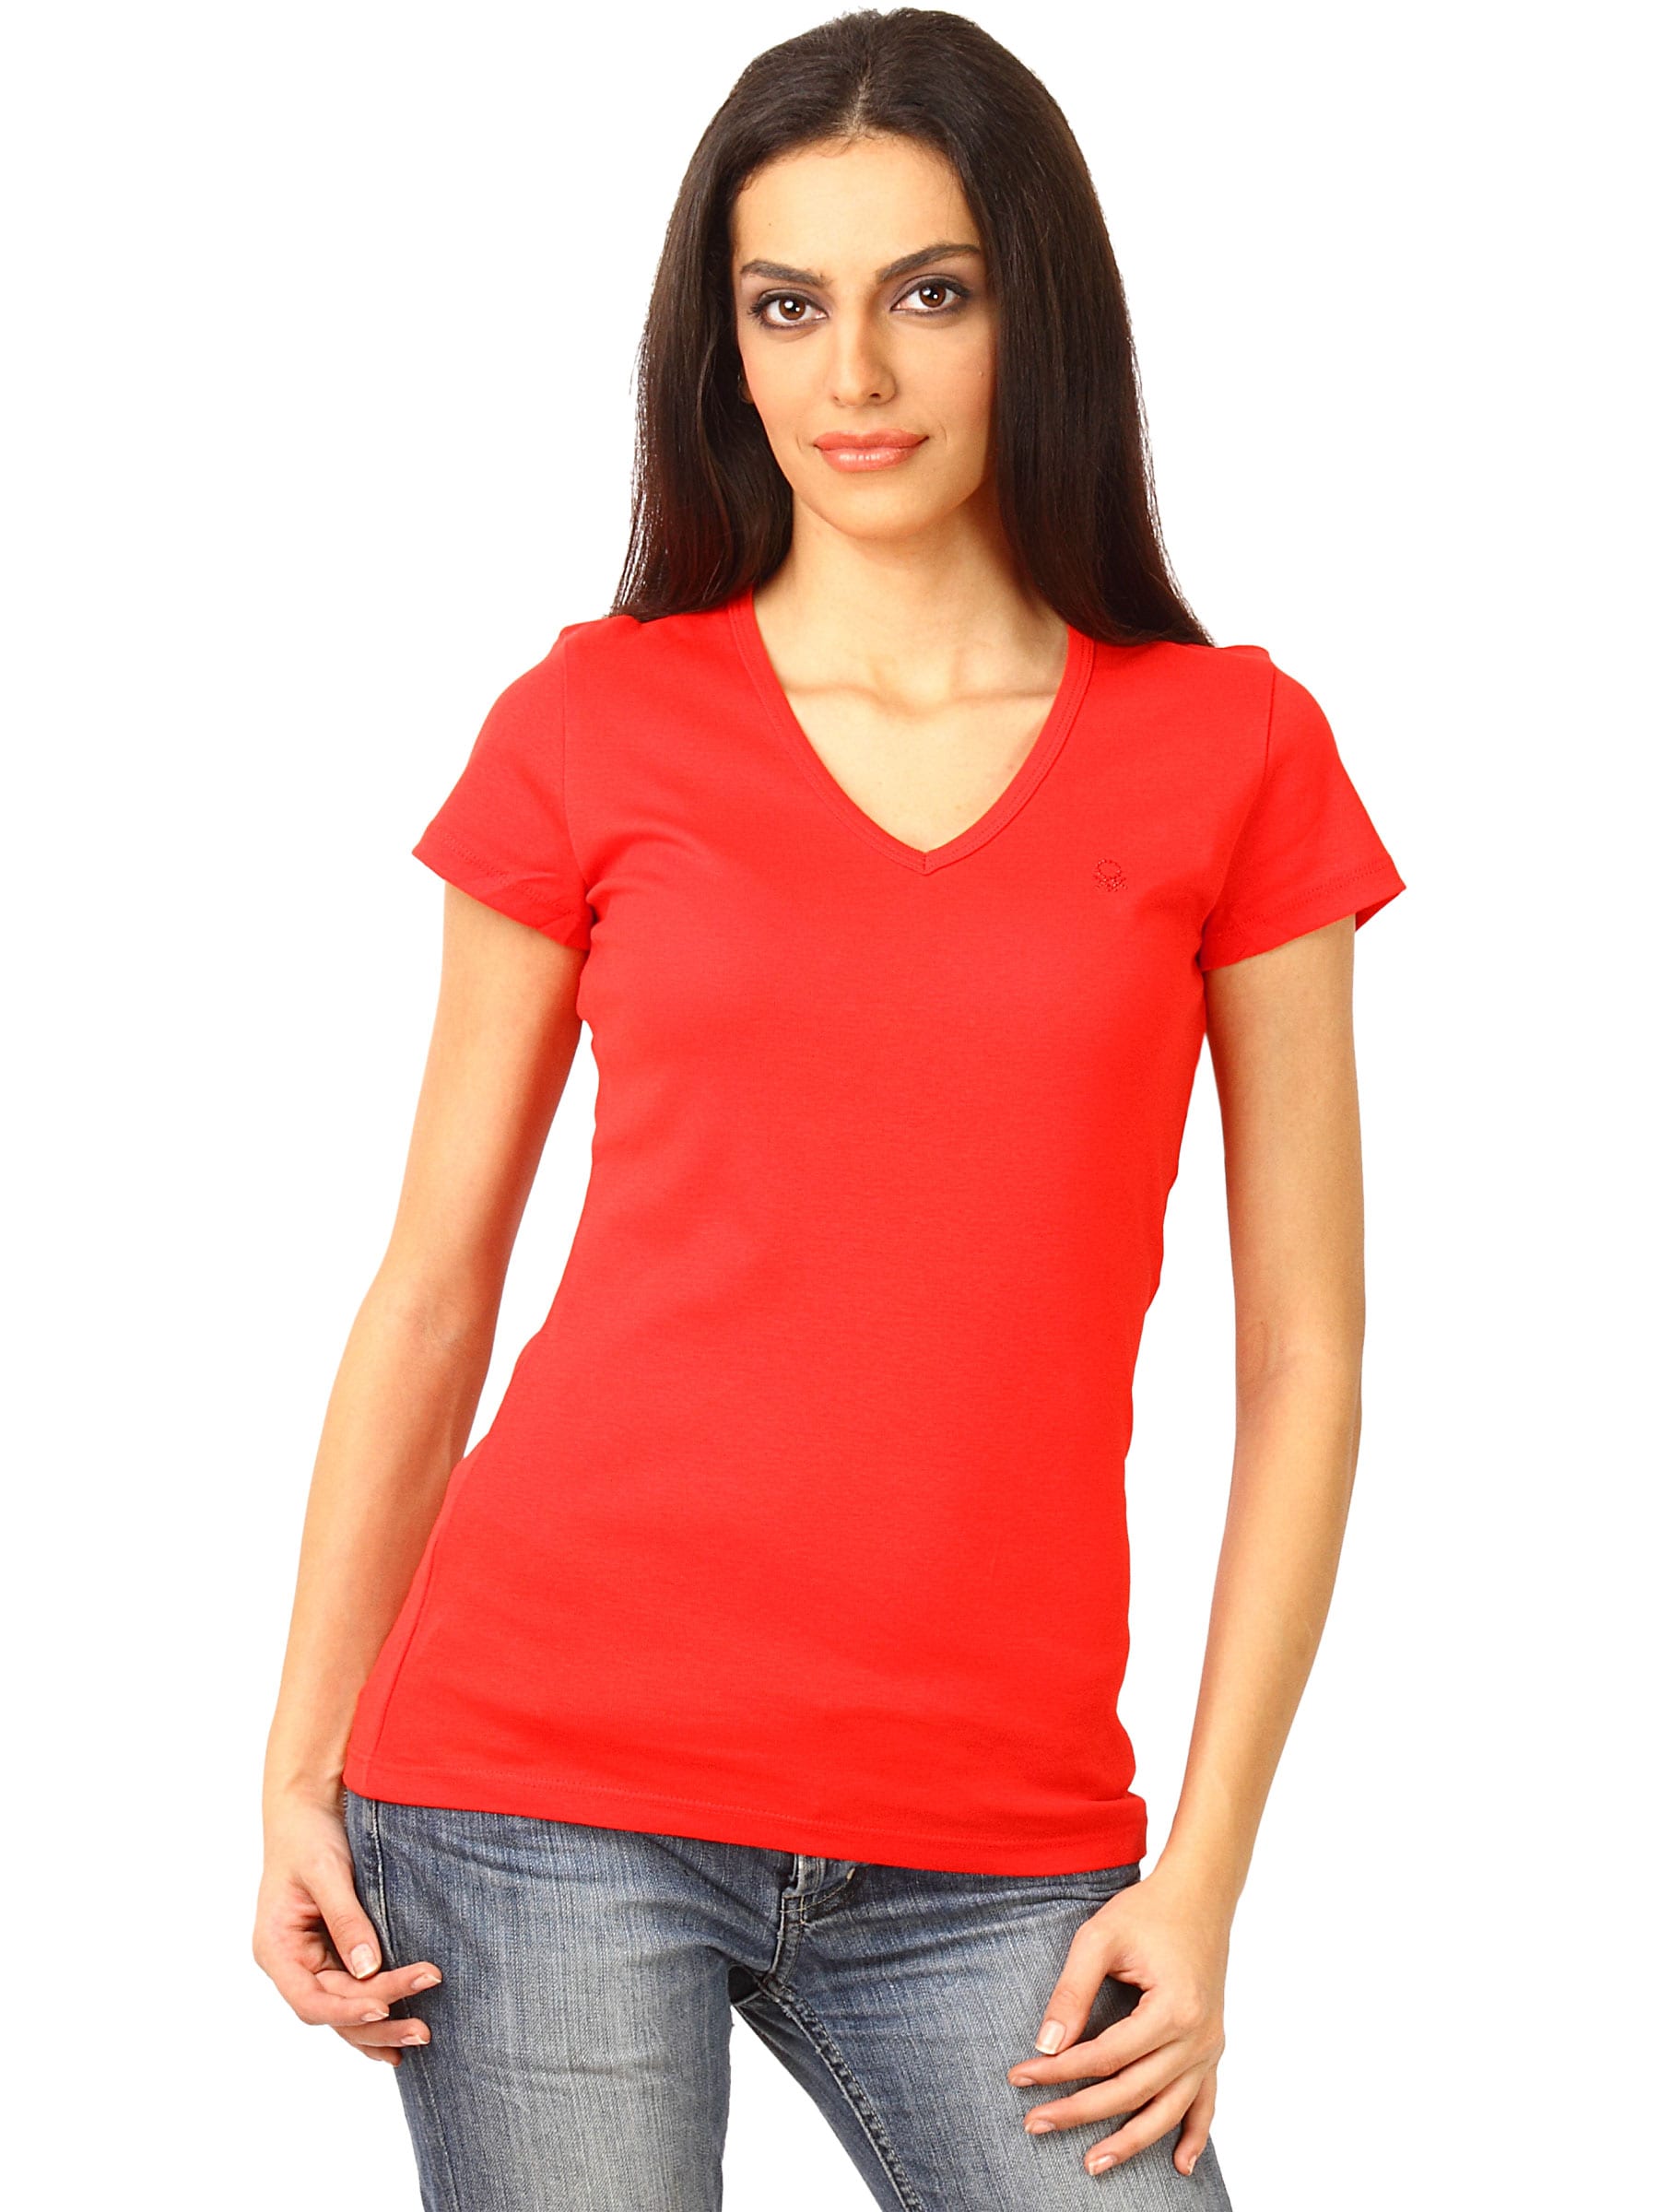 United Colors of Benetton Women Solid Red T-shirt